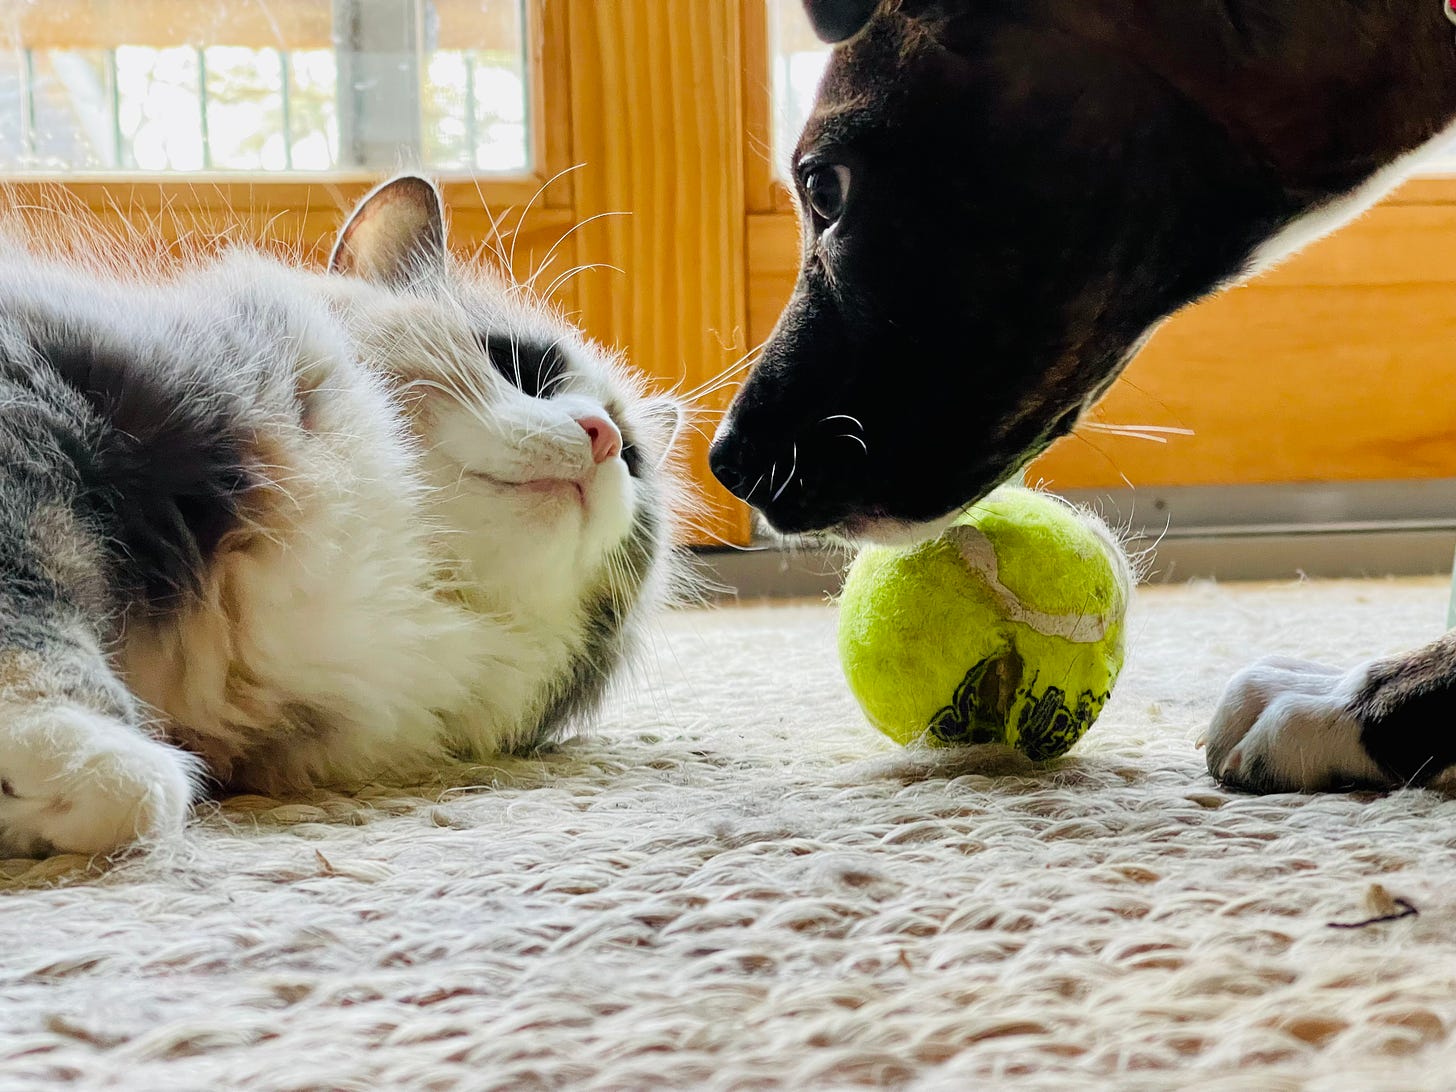 Cat and dog up close and personal, a tennis ball nearby